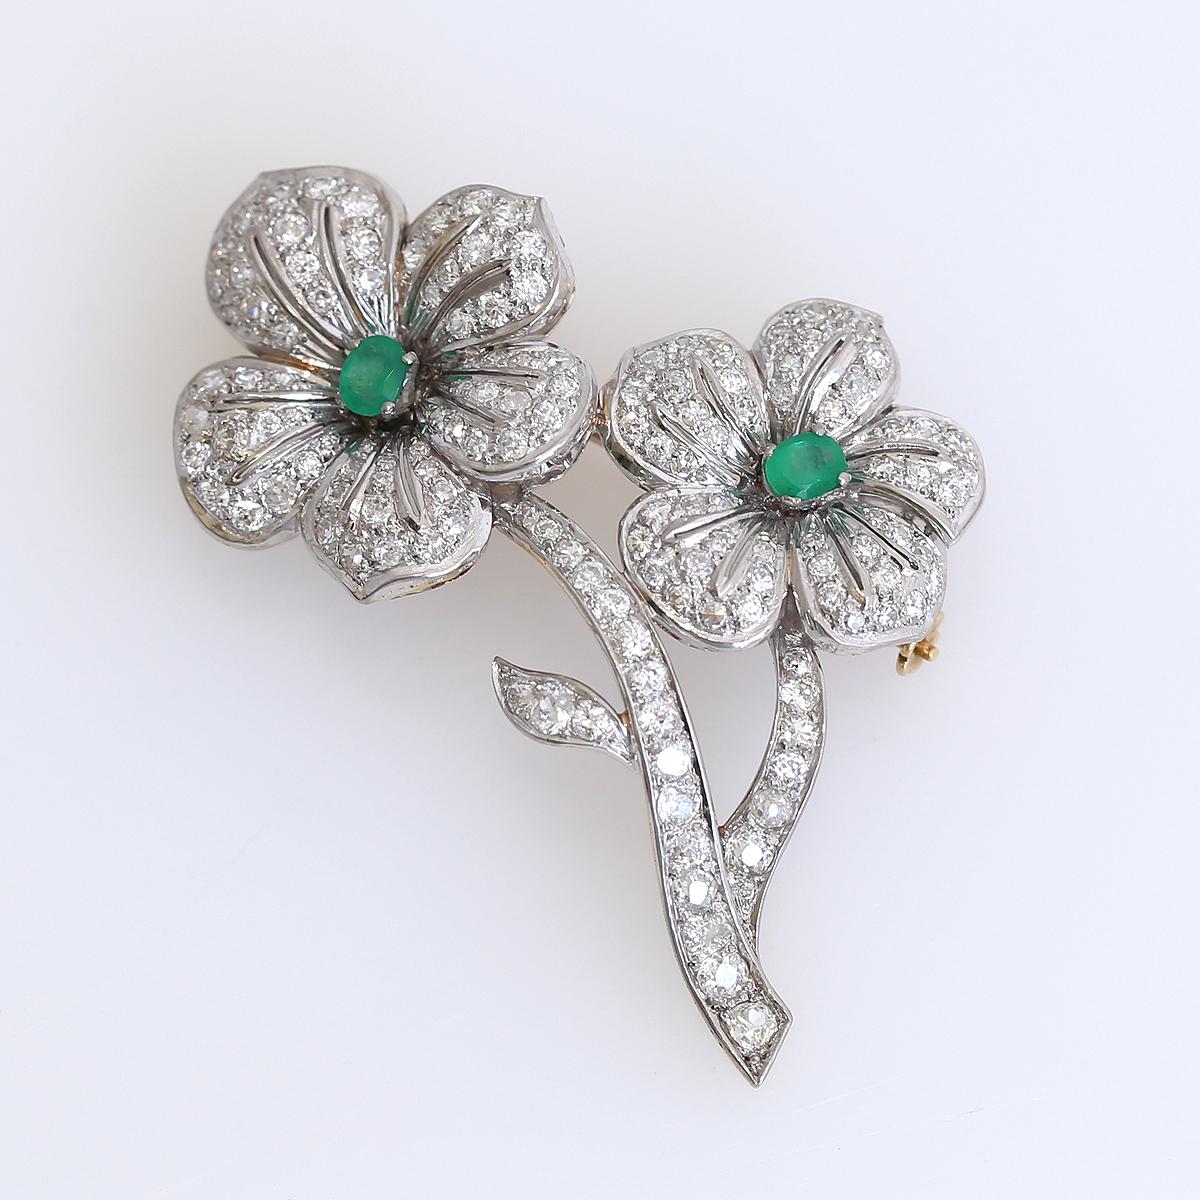 Diamonds Emeralds Flower Brooch 18 Karat White Gold, 1970

Flowers brooch comprised of Diamonds all throughout the composition and two Emeralds in the centre. The outstanding craftsmanship of a jeweler with fine work on both sides of the brooch. 18